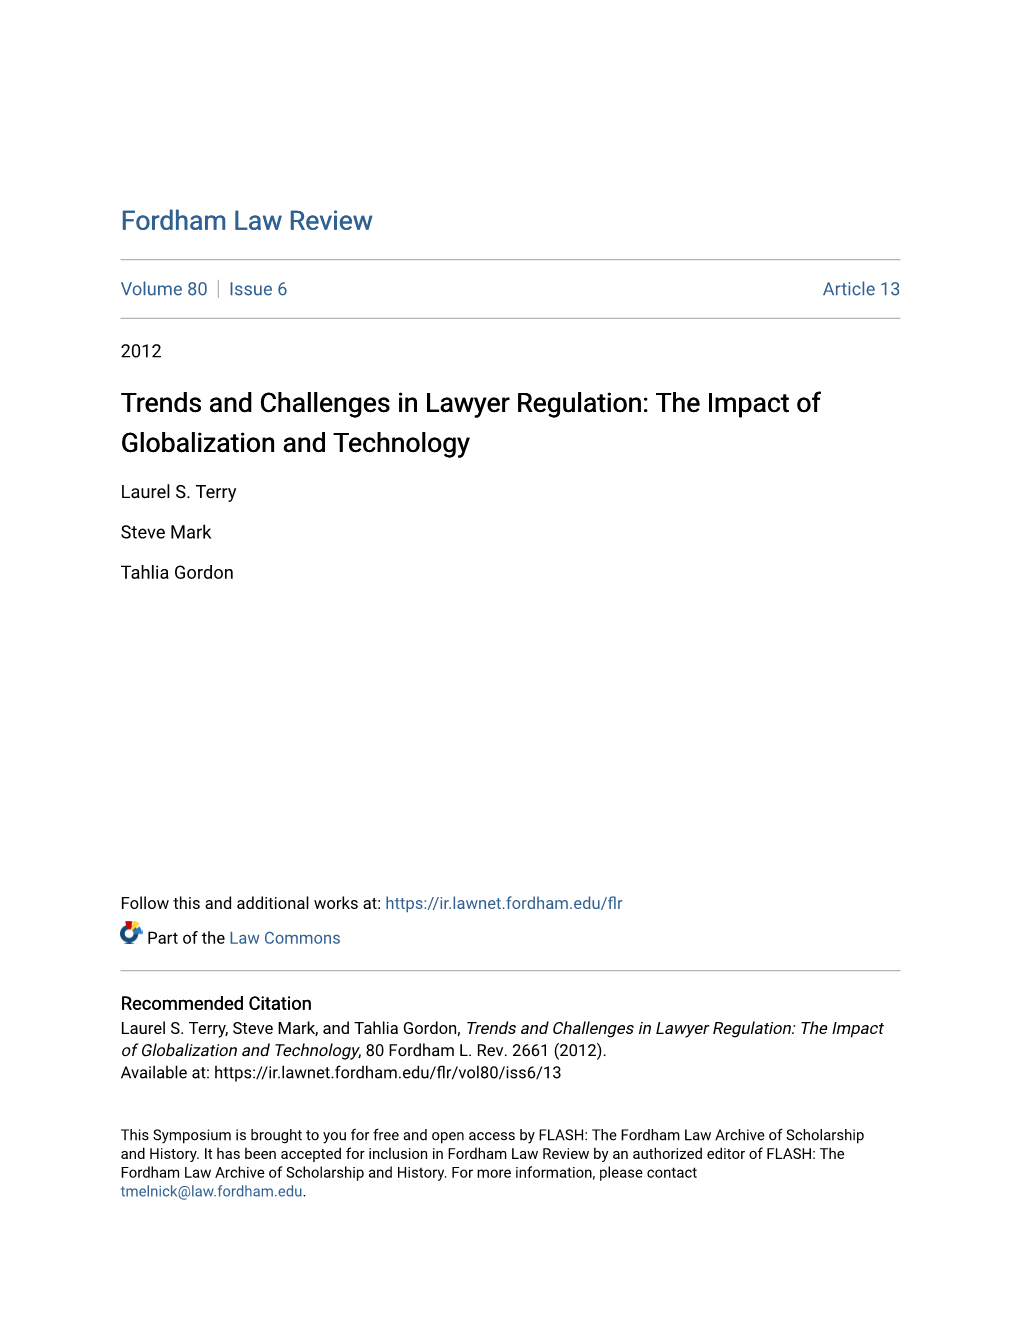 Trends and Challenges in Lawyer Regulation: the Impact of Globalization and Technology